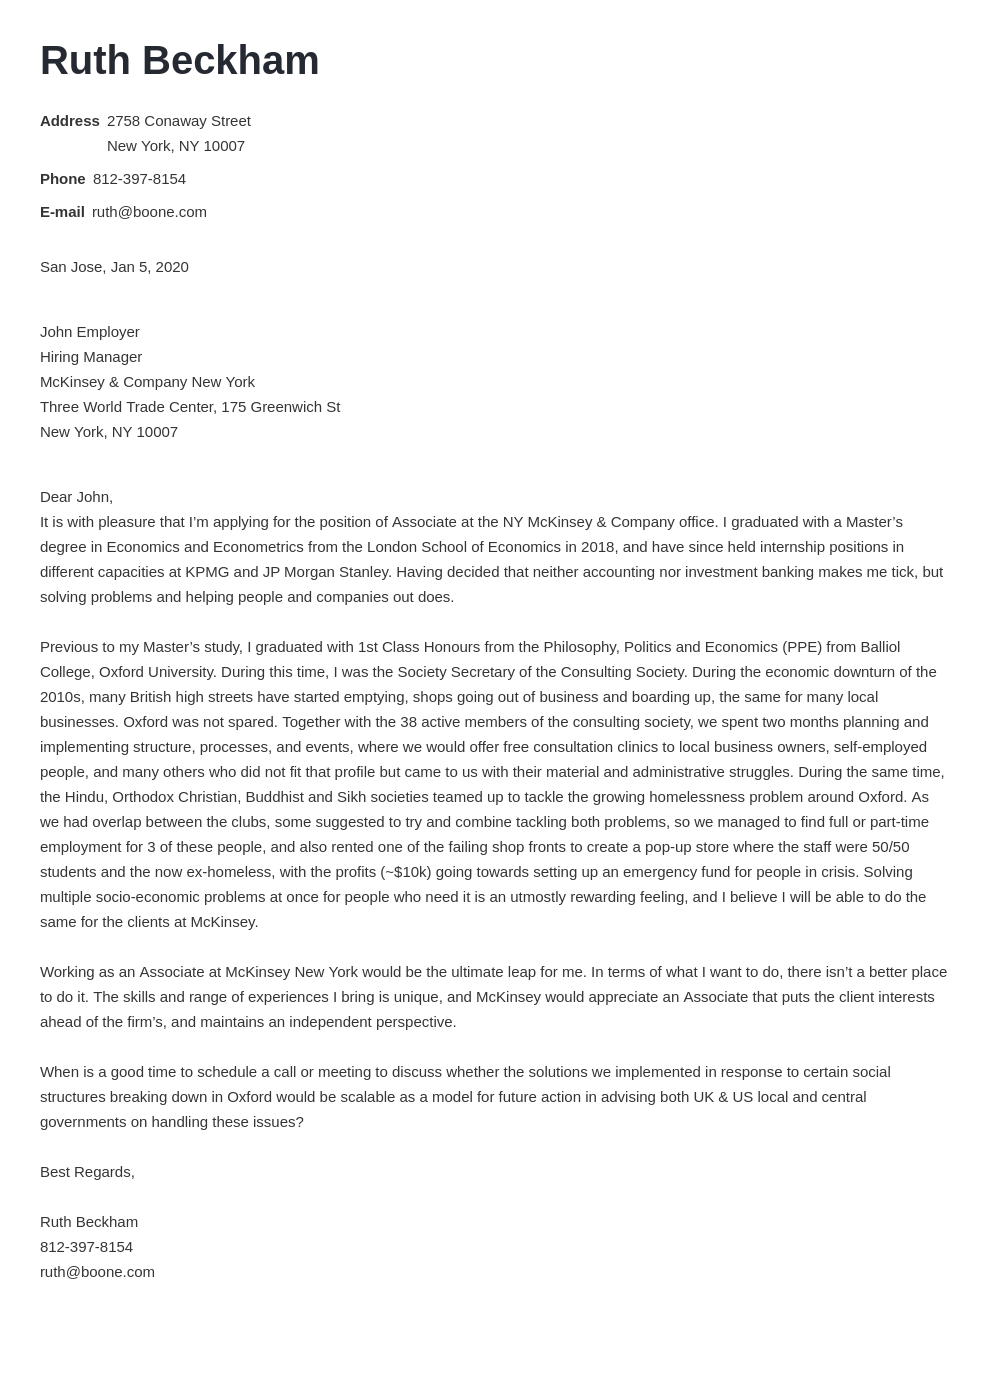 mckinsey cover letter template